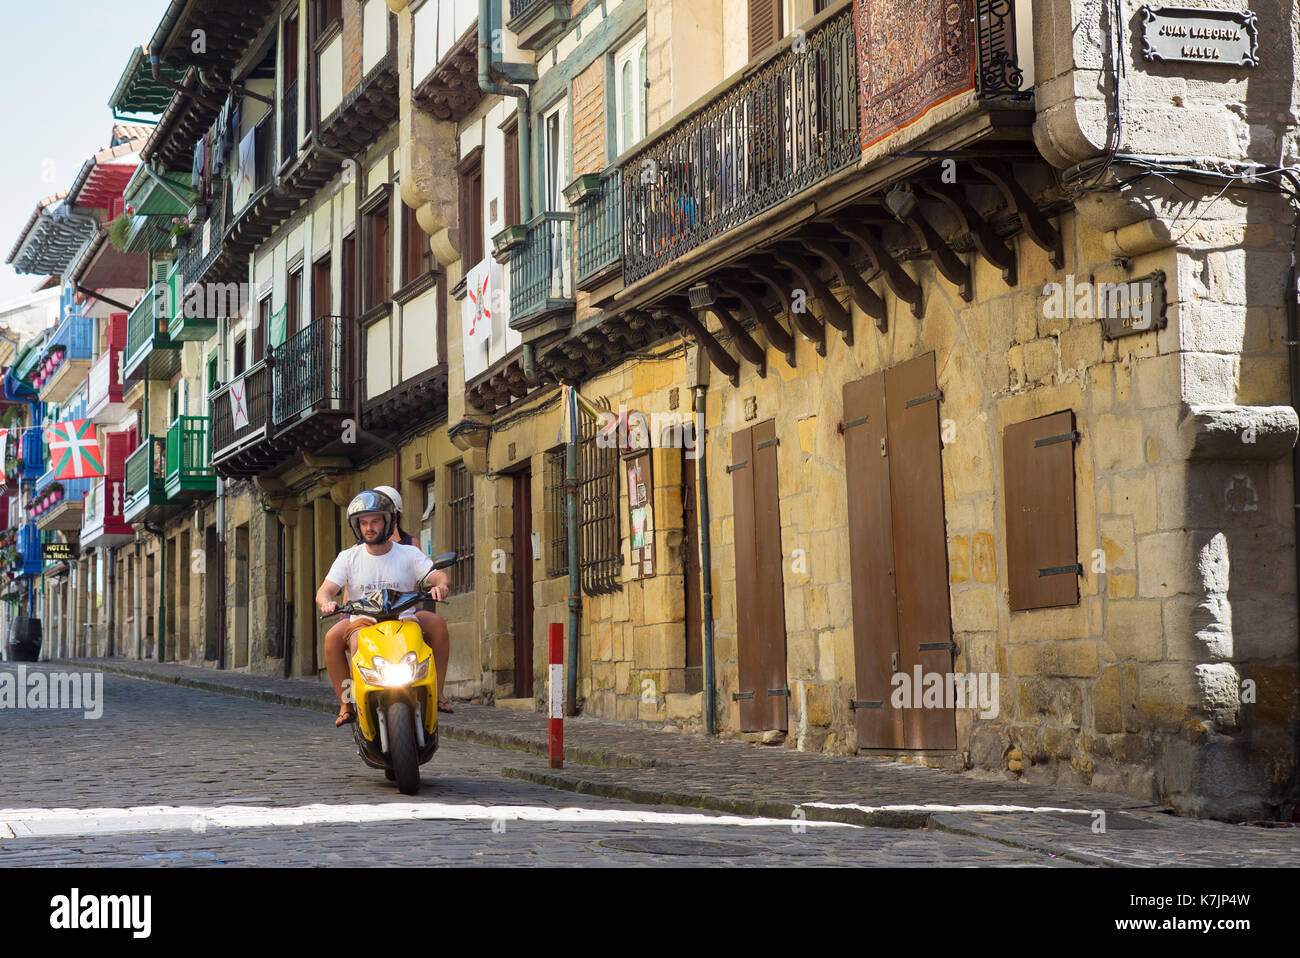 Motorcyclist on cobbled street passing medieval half-timbered architecture in Hondarribia, in Basque Country, Spain Stock Photo